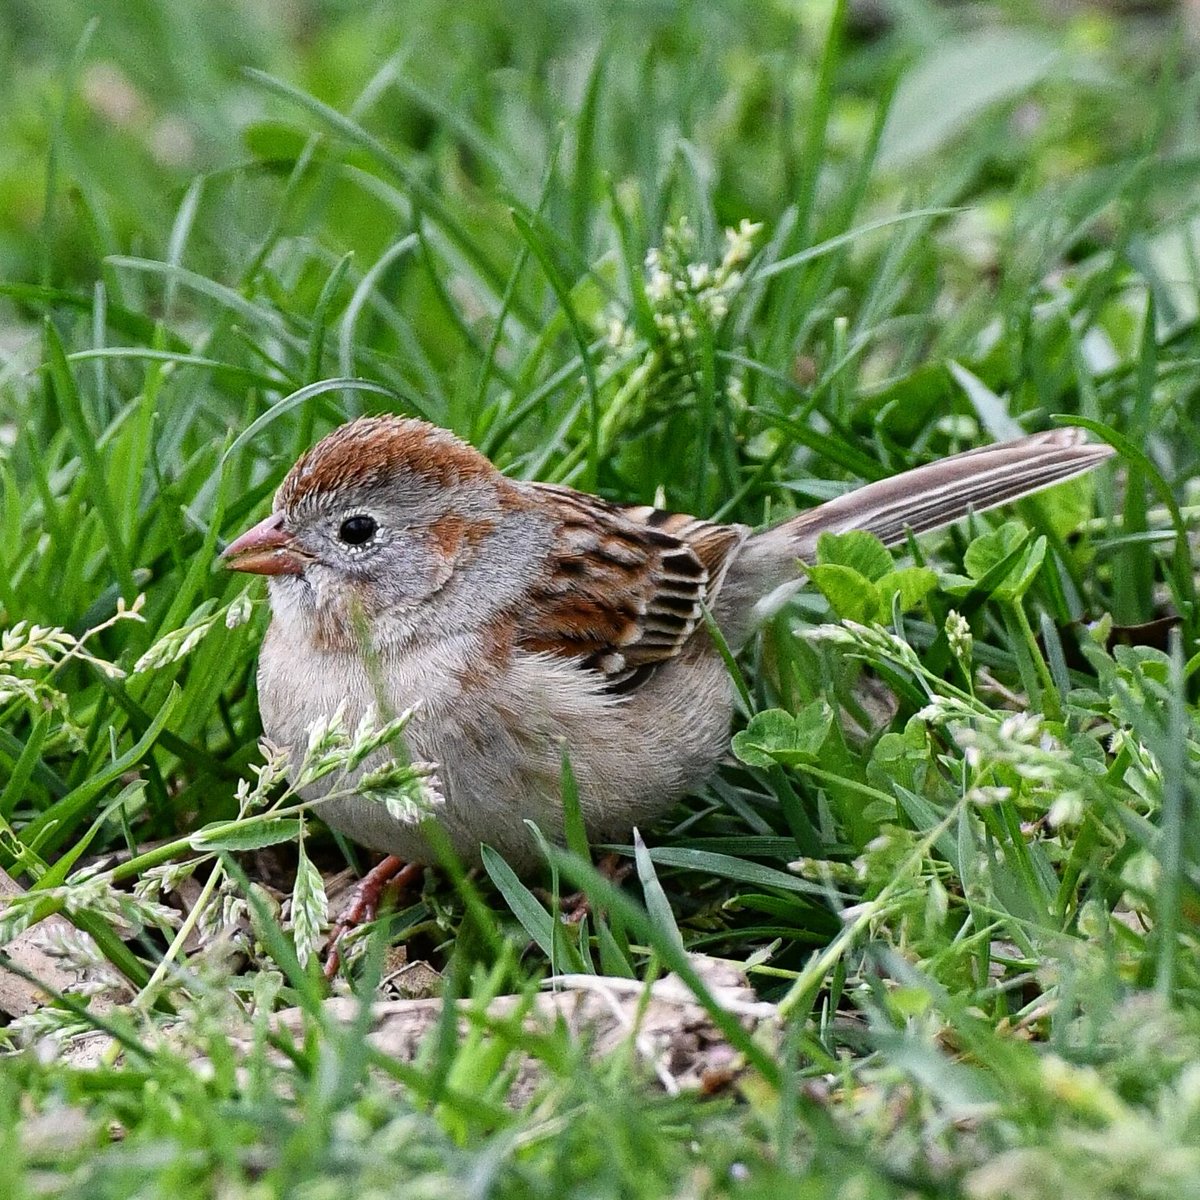 Field Sparrow foraging in Brooklyn's Fort Greene Park yesterday.